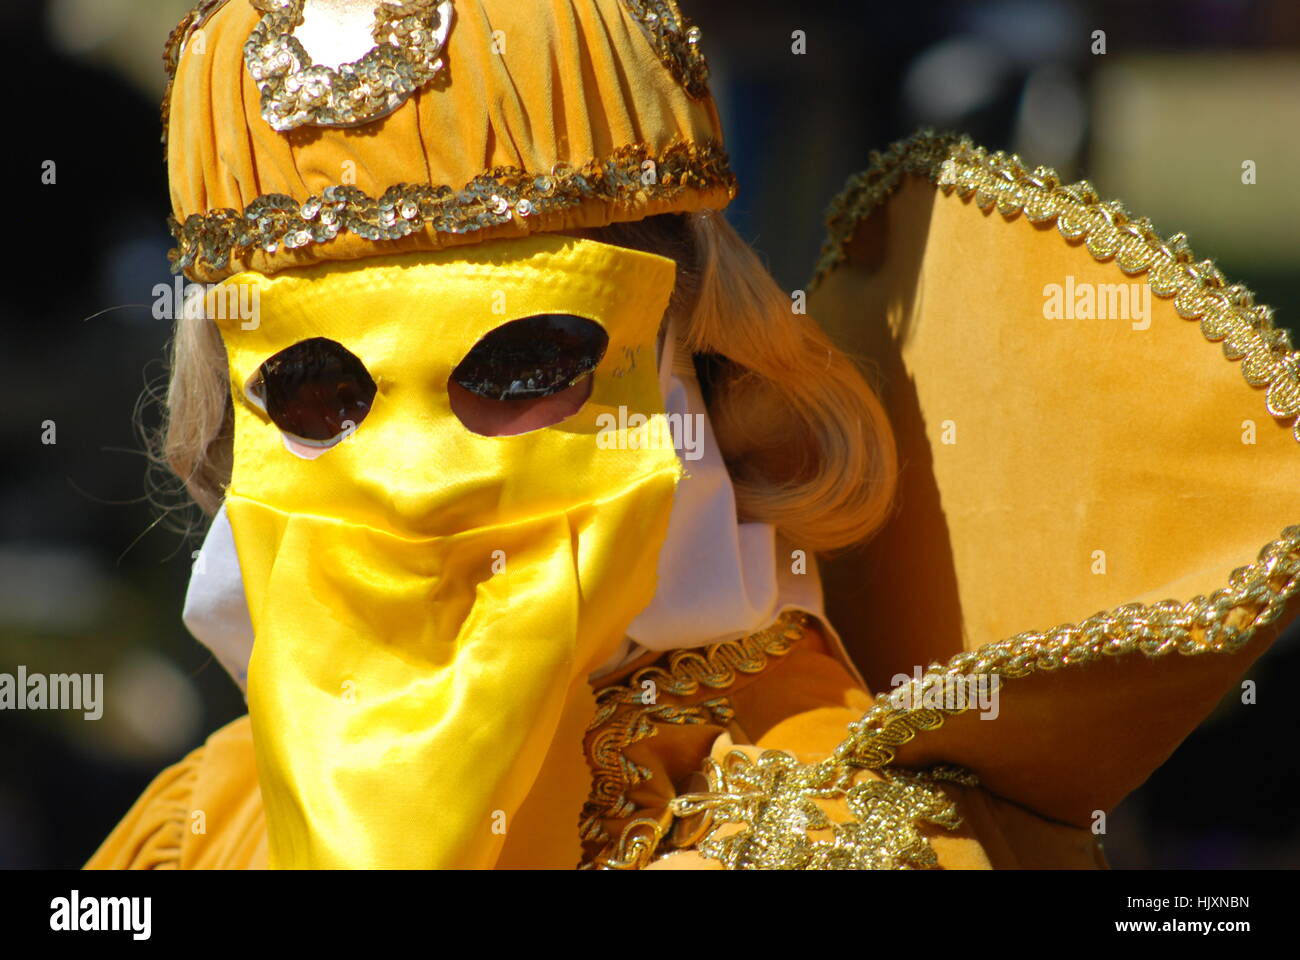 Participating in New Orleans parades on Mardi Gras. Stock Photo